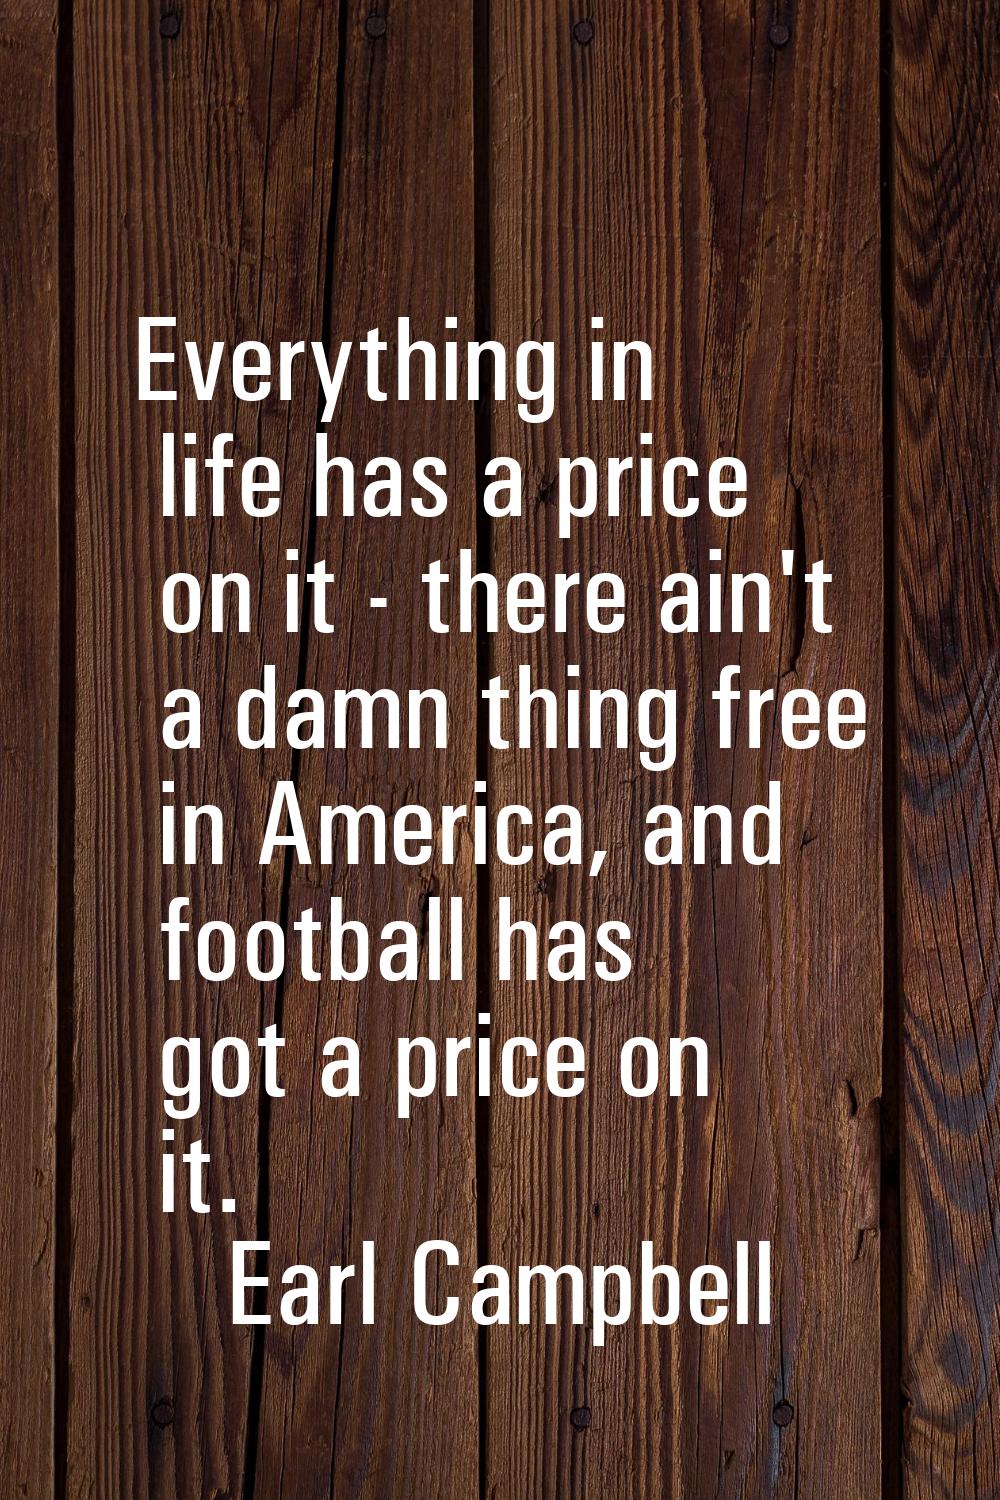 Everything in life has a price on it - there ain't a damn thing free in America, and football has g